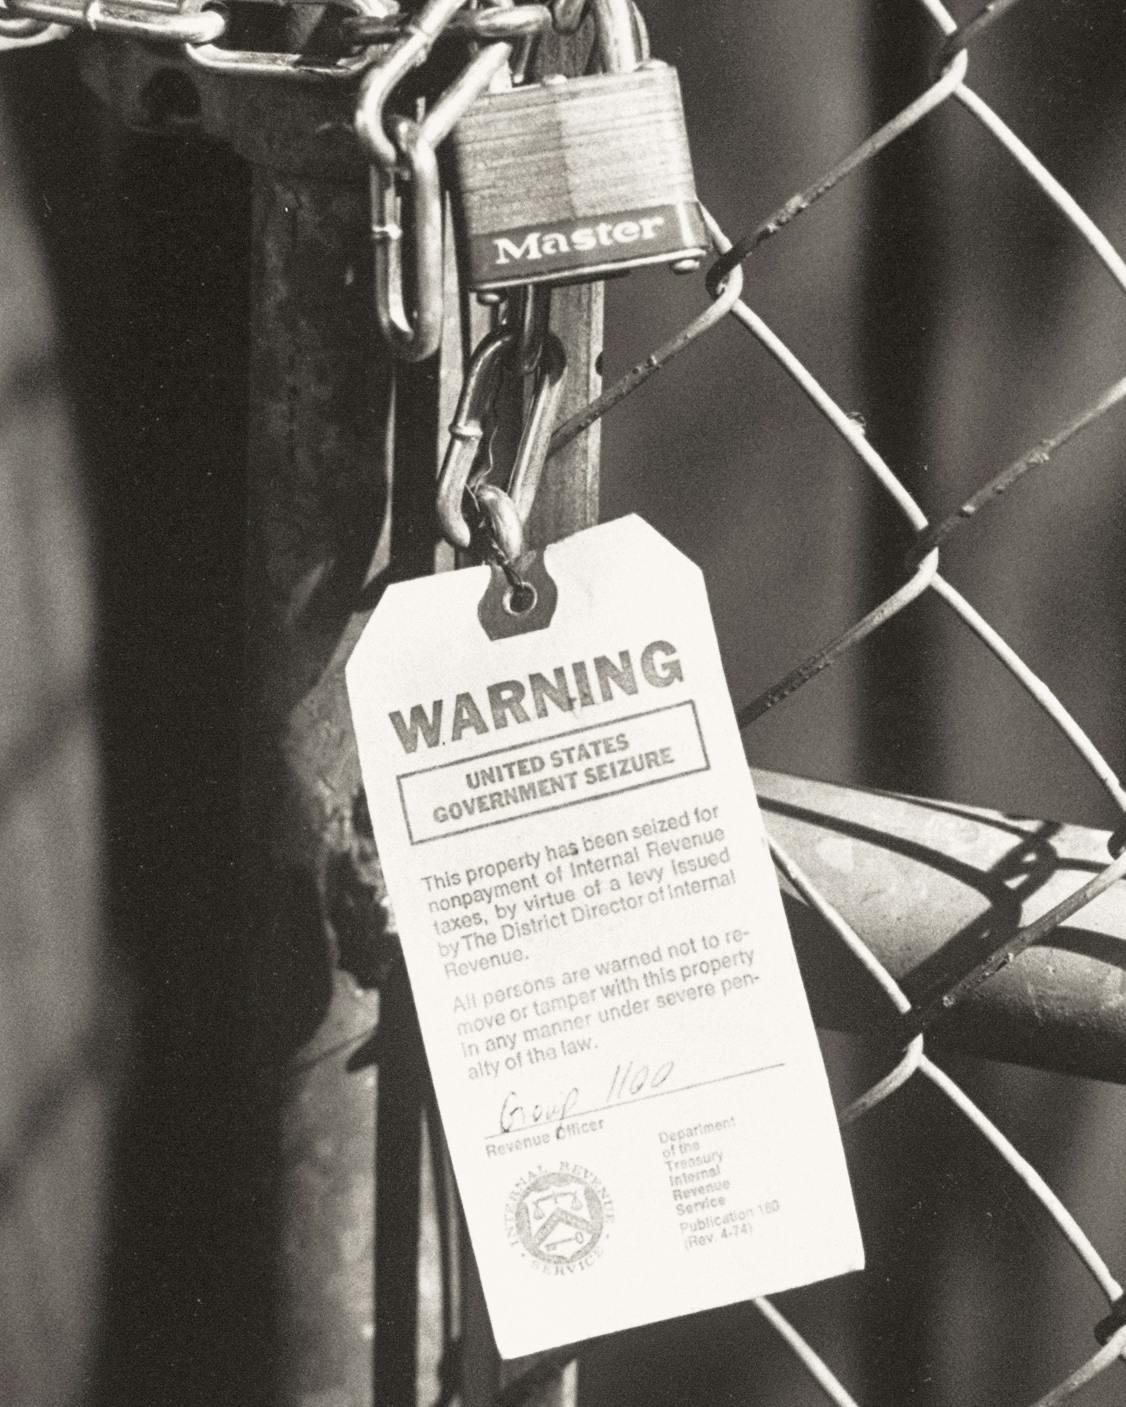 The chain-link fence at Willie’s country club, padlocked by the IRS.